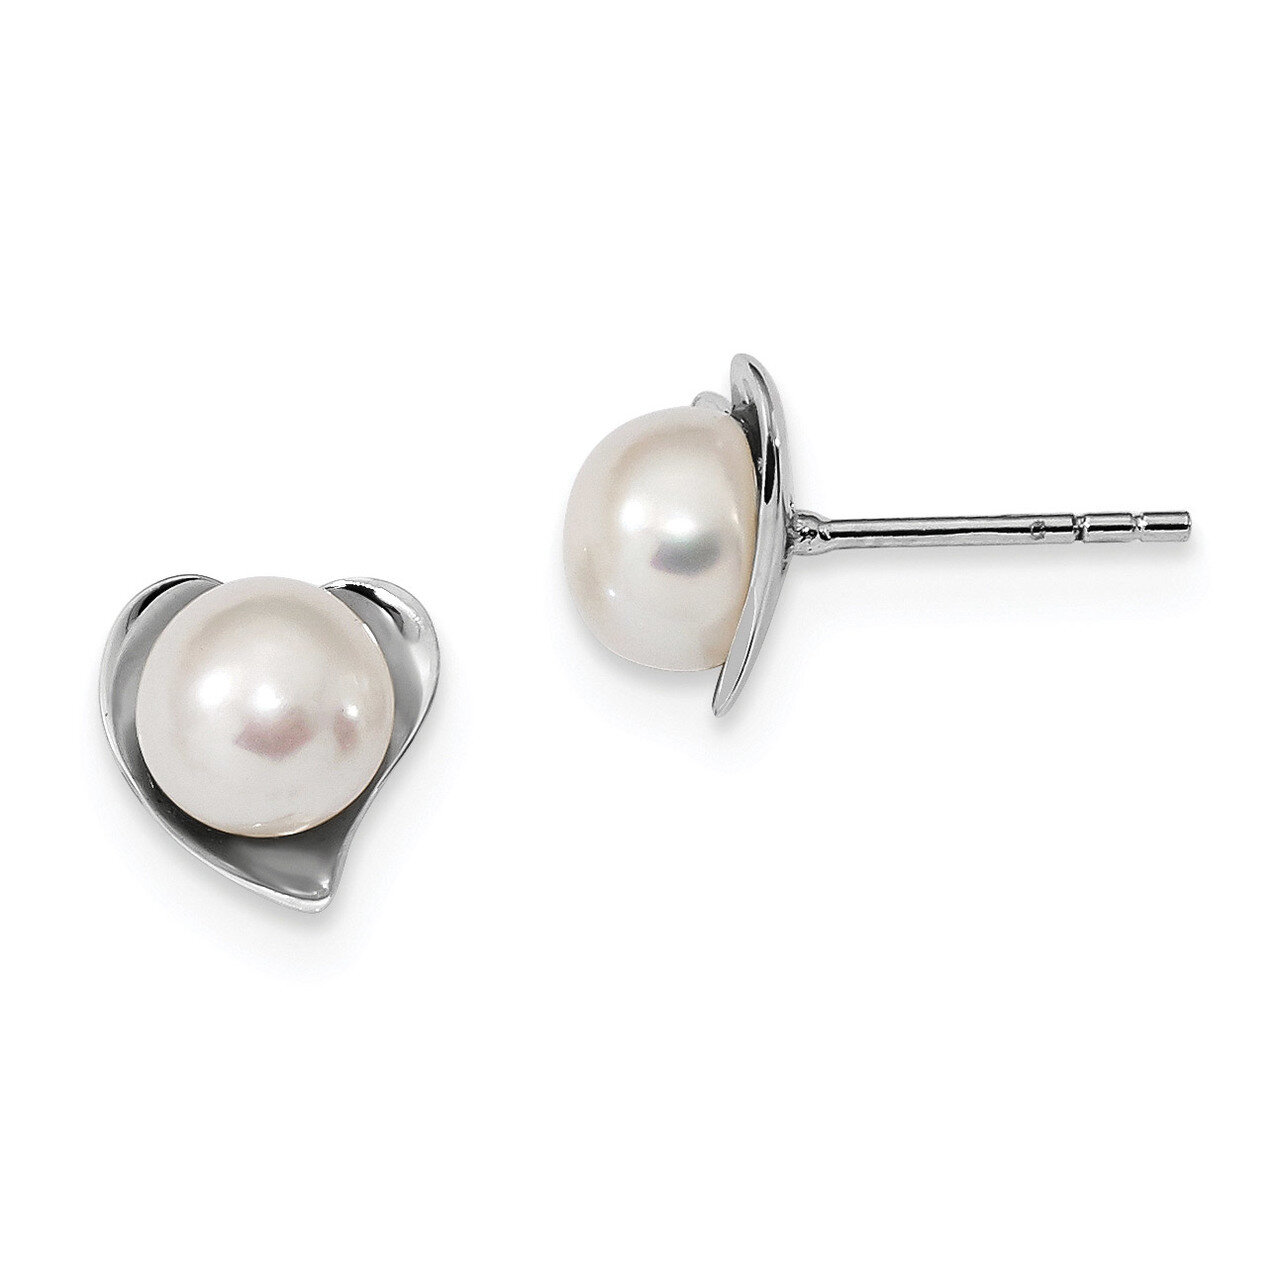 7-8mm White Button Cultured Freshwater Pearl Post Earrings Sterling Silver Rhodium-plated QE13865